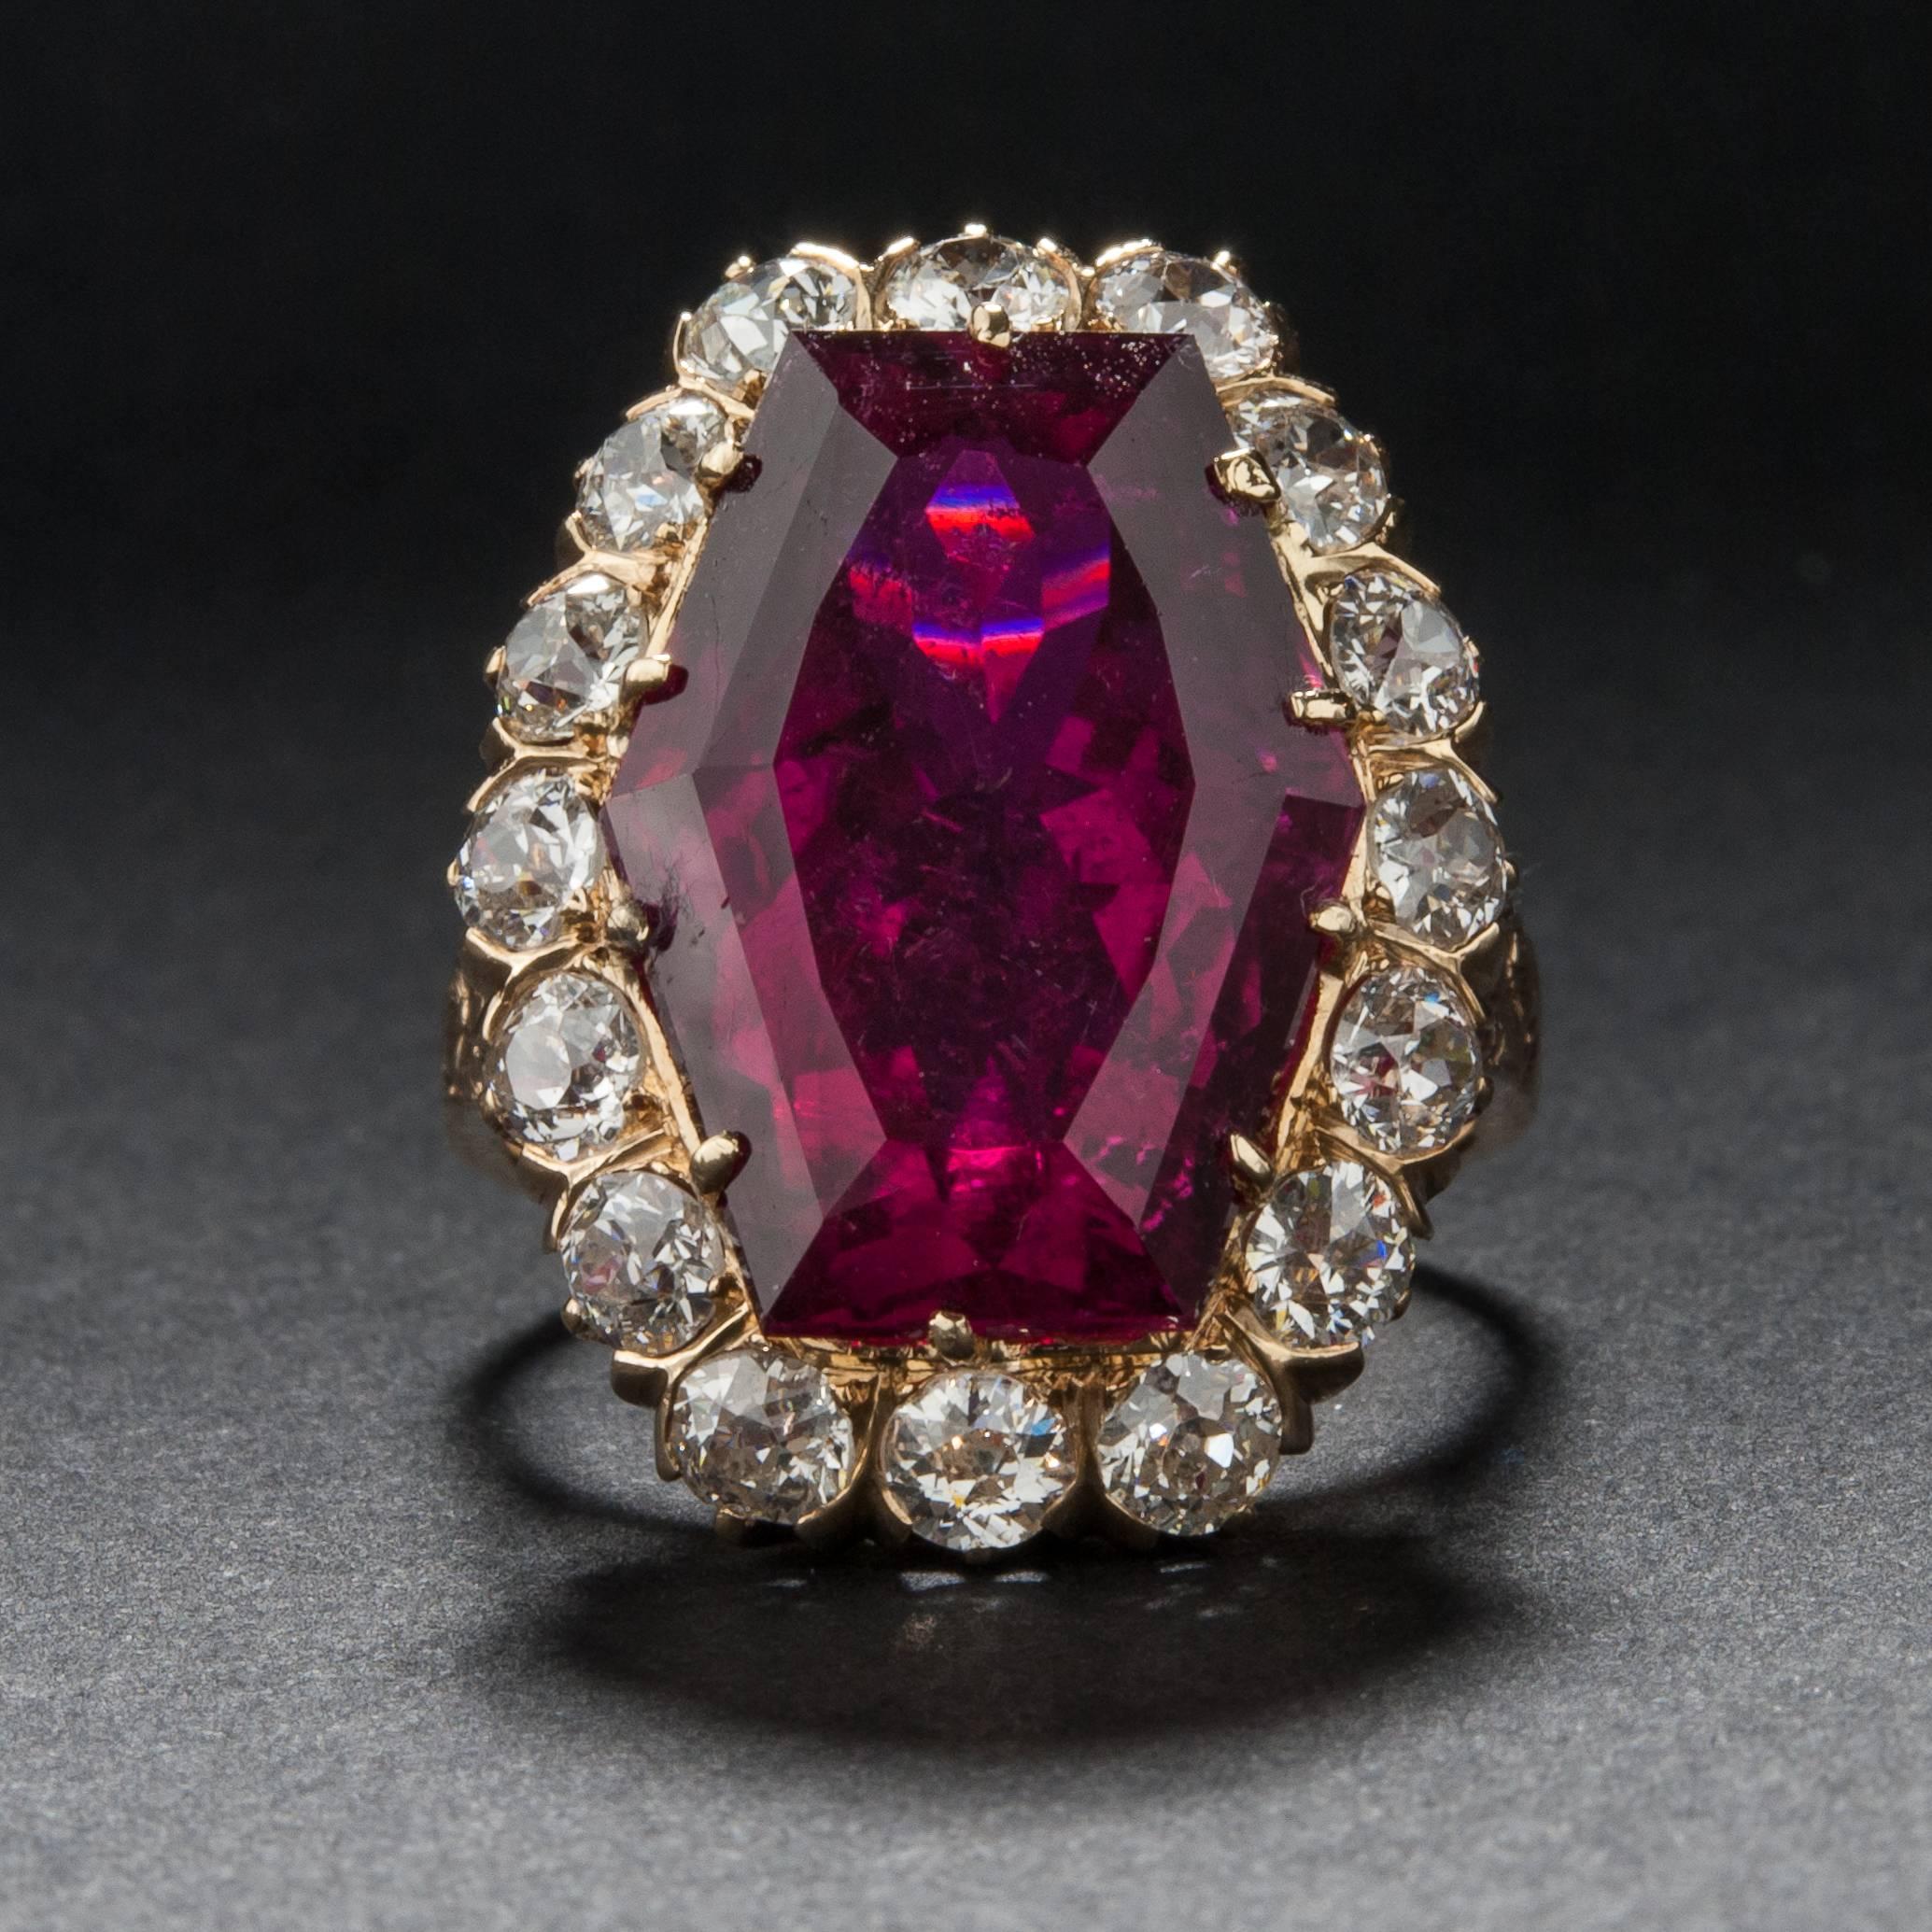 This extraordinary ring features a beautiful 11.00 carat rubelite center stone surrounded by approximately 2.00 carats of accent diamonds. This mounting is crafted in 14k yellow gold and it is currently size 6.